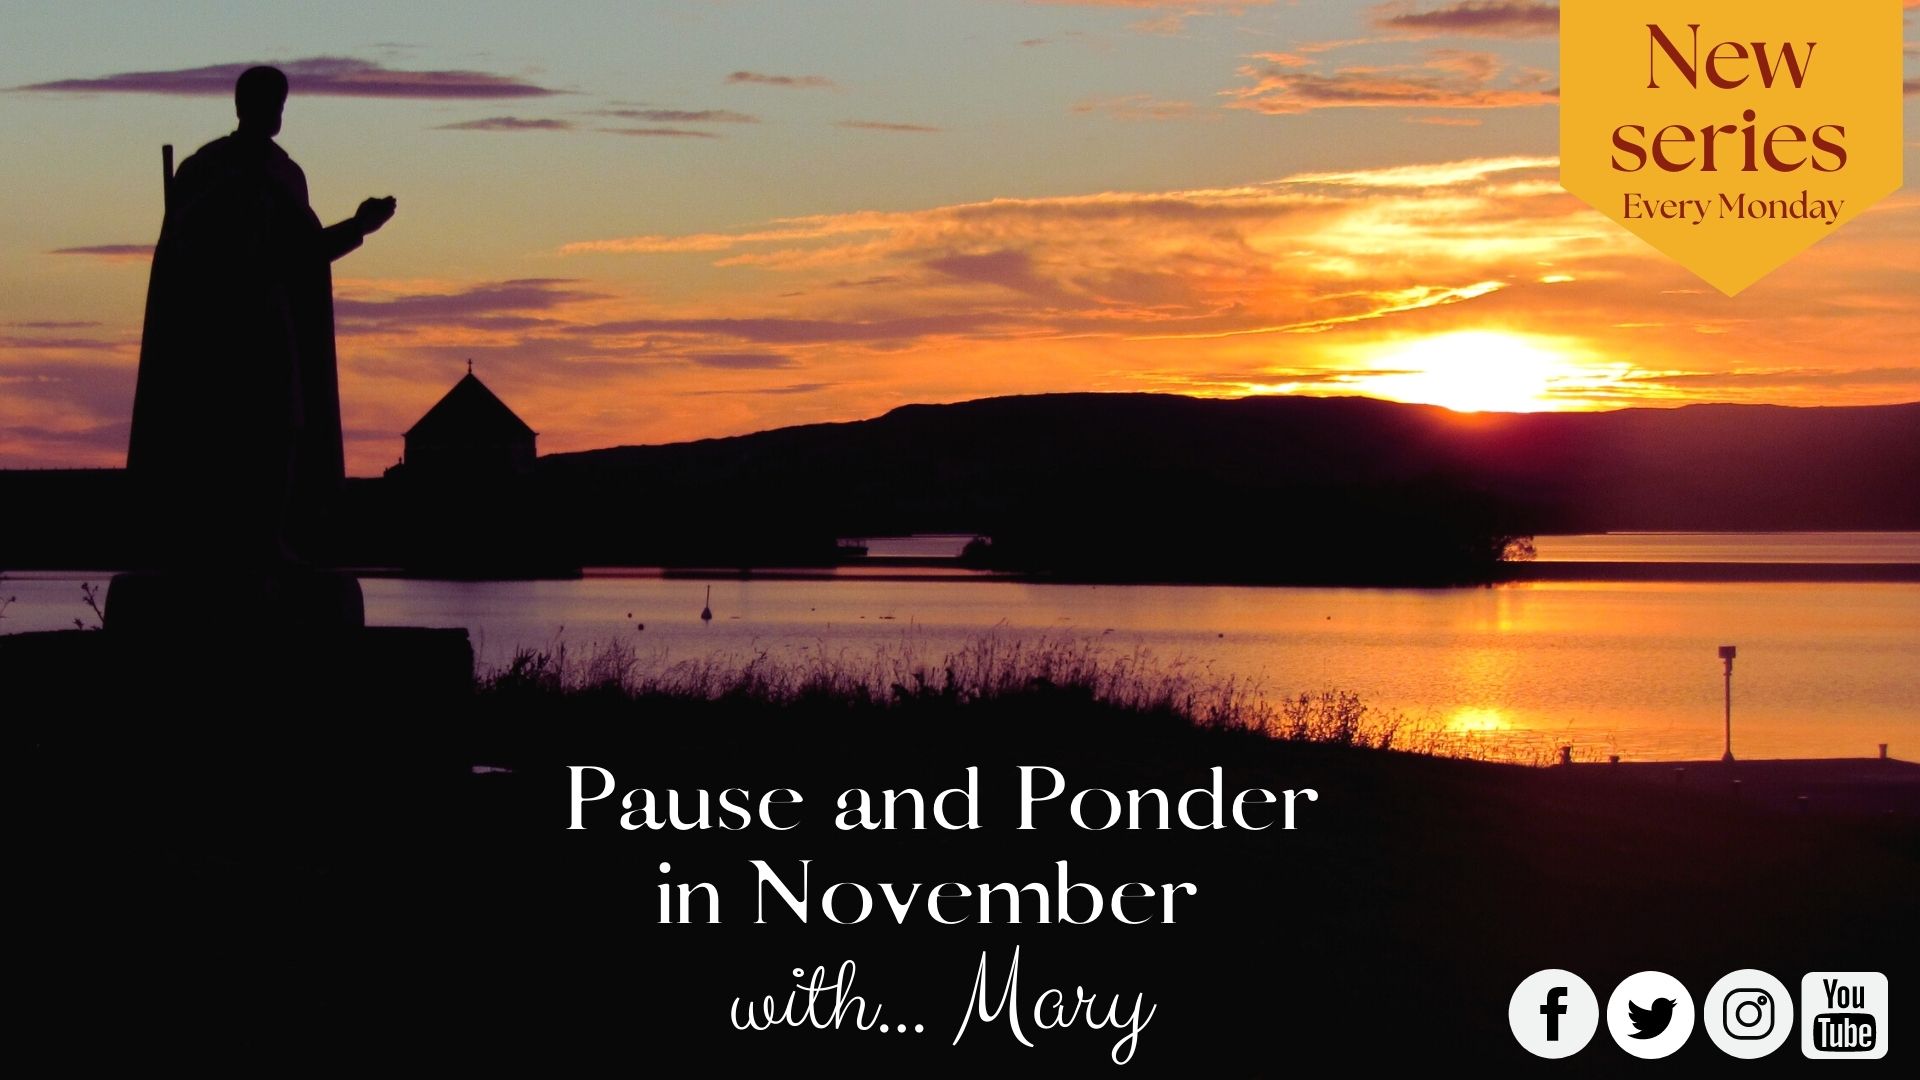 Mary introduces new 'Pause and Ponder in November' Lough Derg series